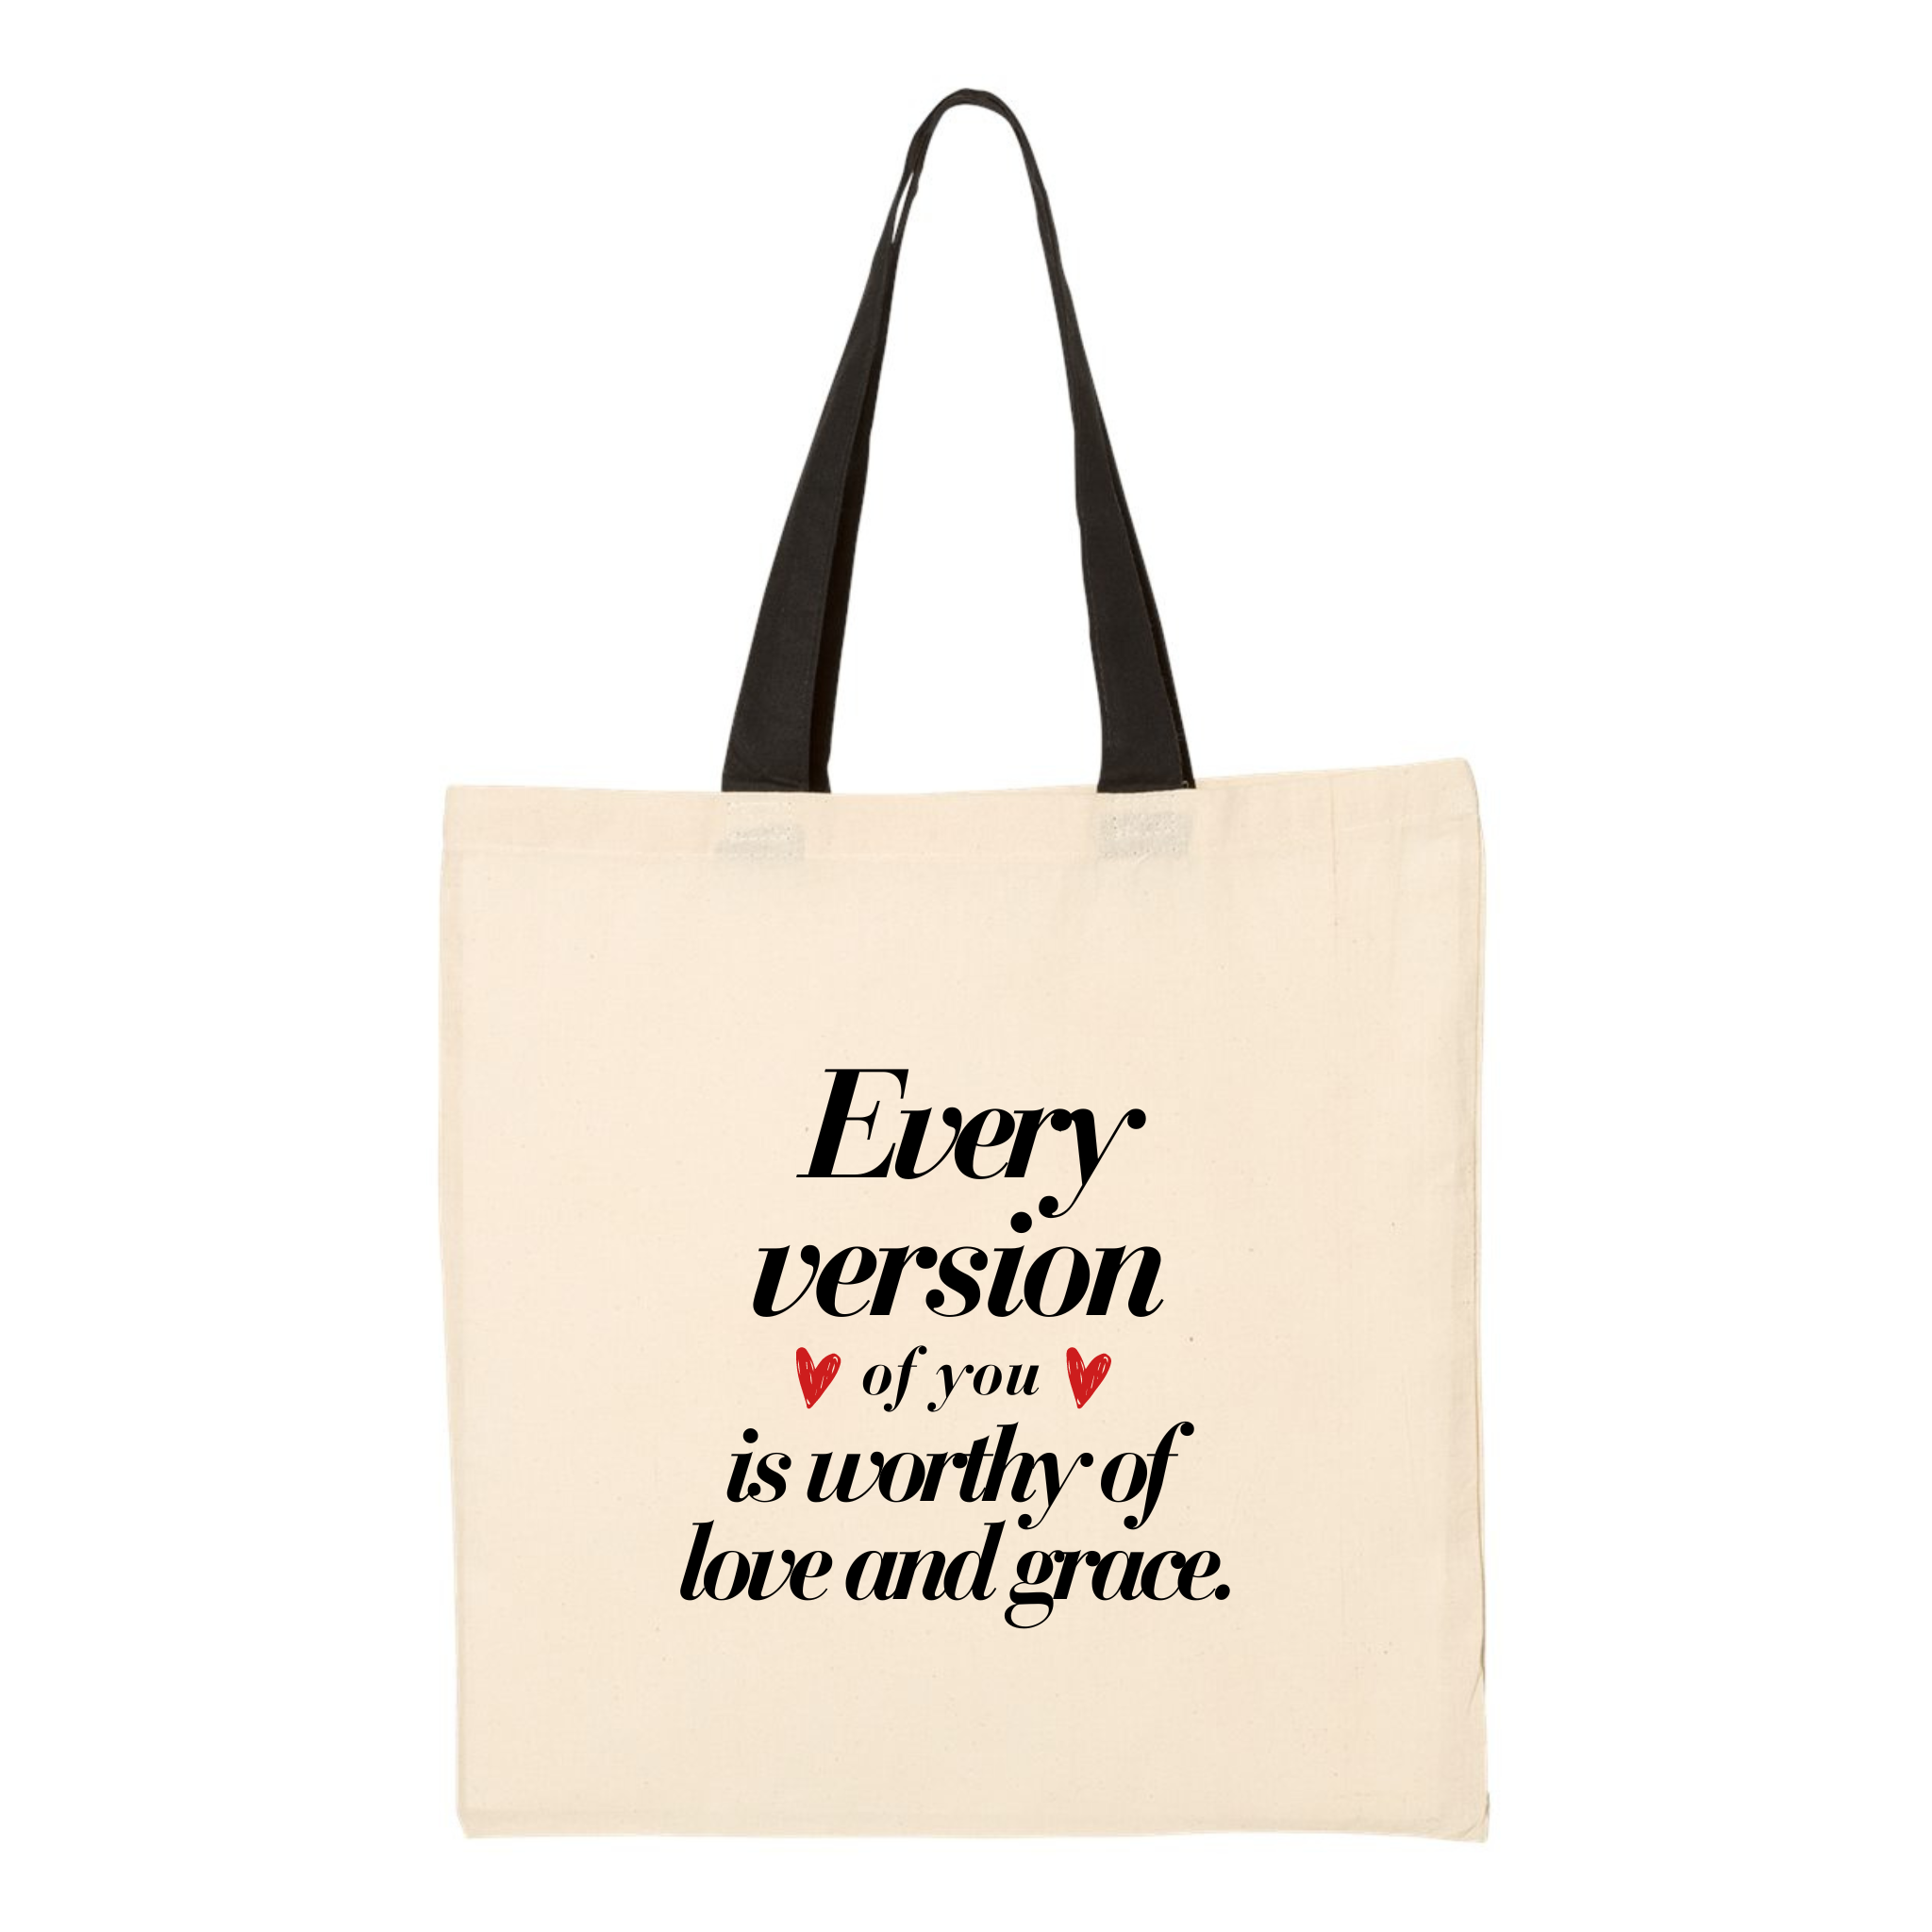 Every Version of You Is Worthy of Love and Grace Tote Bag